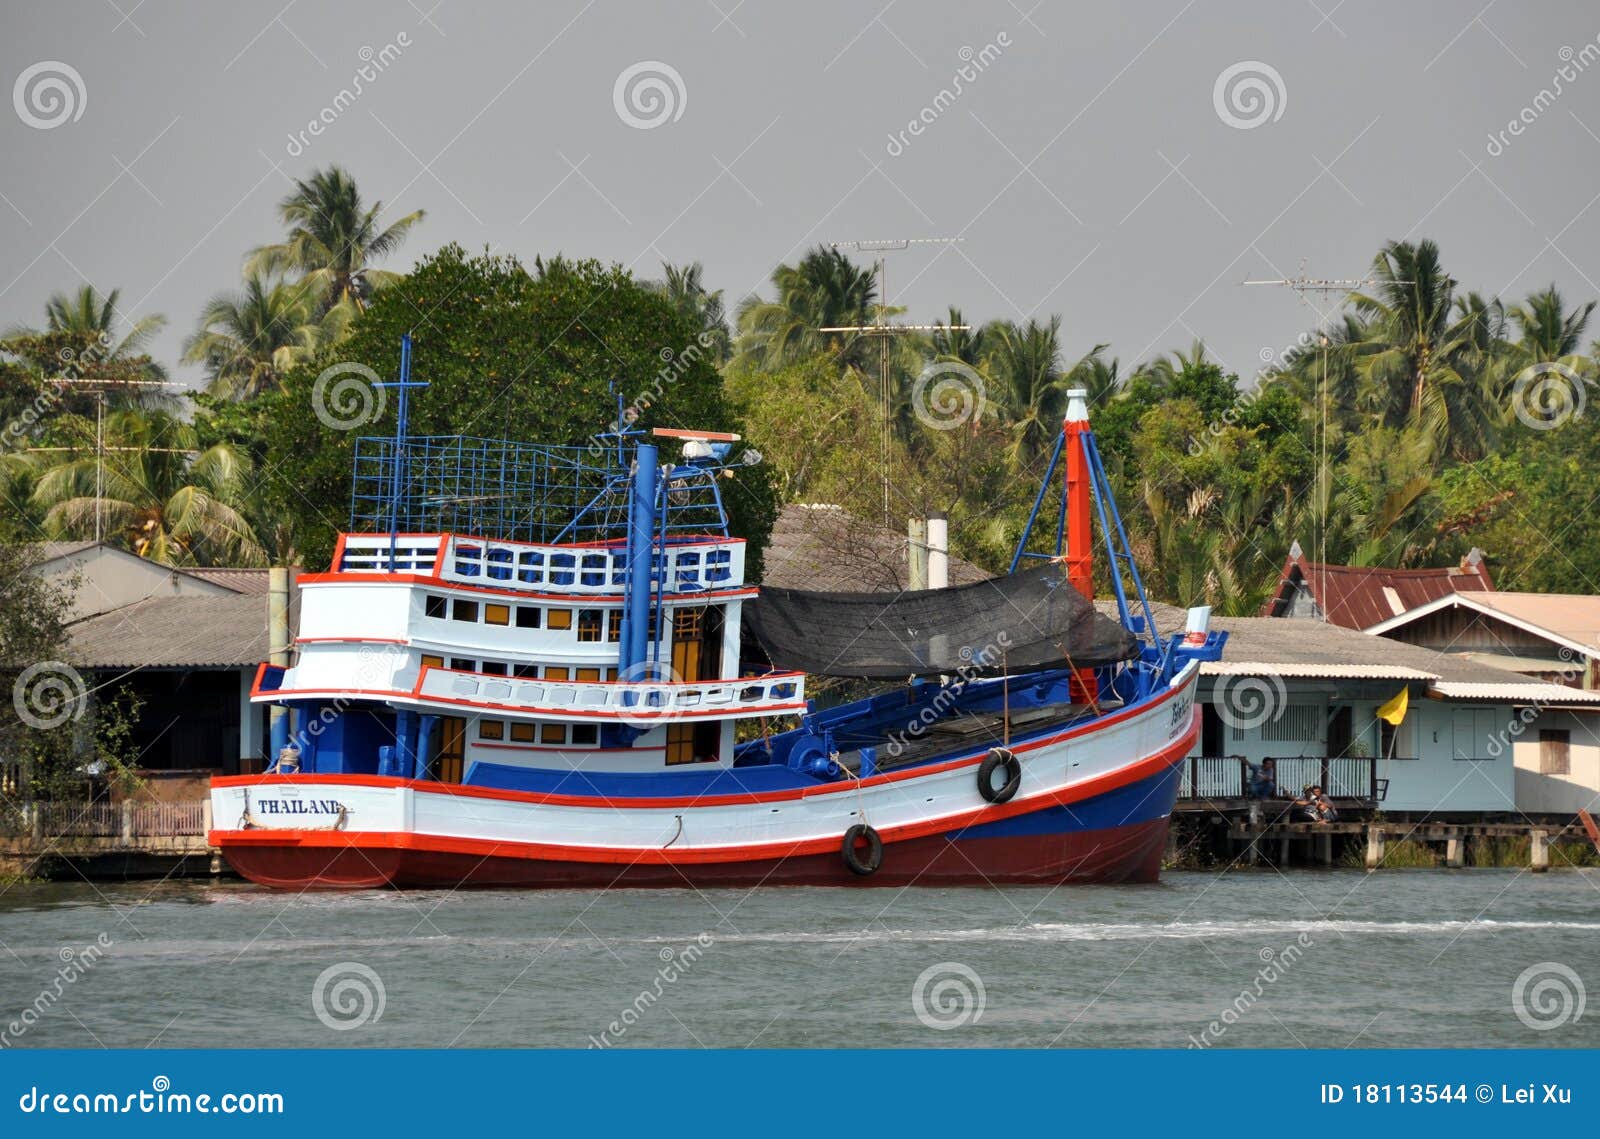 large fishing vessel steams past old wooden houses lining the banks 